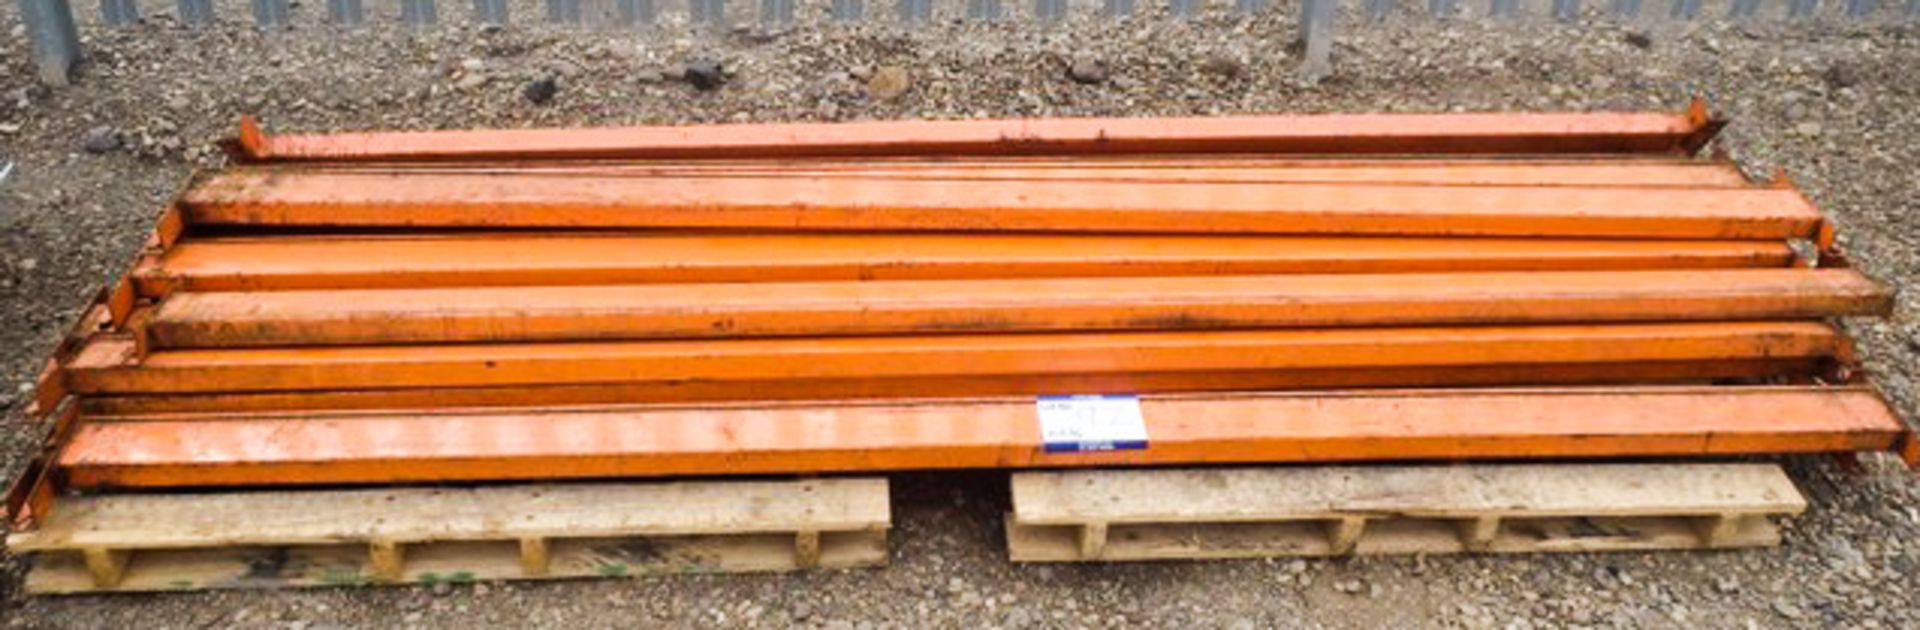 LARGE QUANTITY OF PALLET RACKING BEAMS